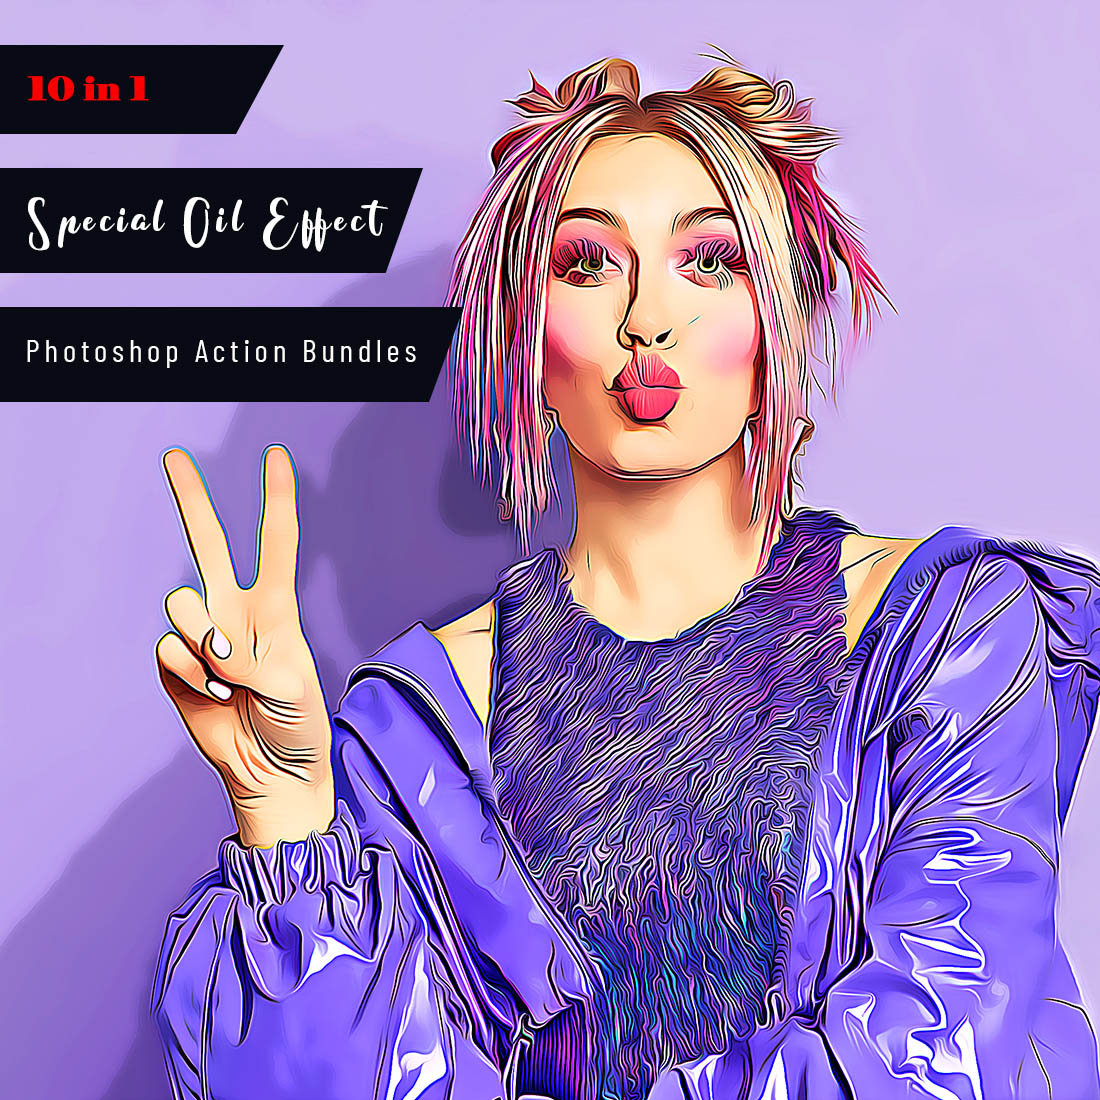 preview 10 in 1 Special Oil Effect Photoshop Action Bundles.